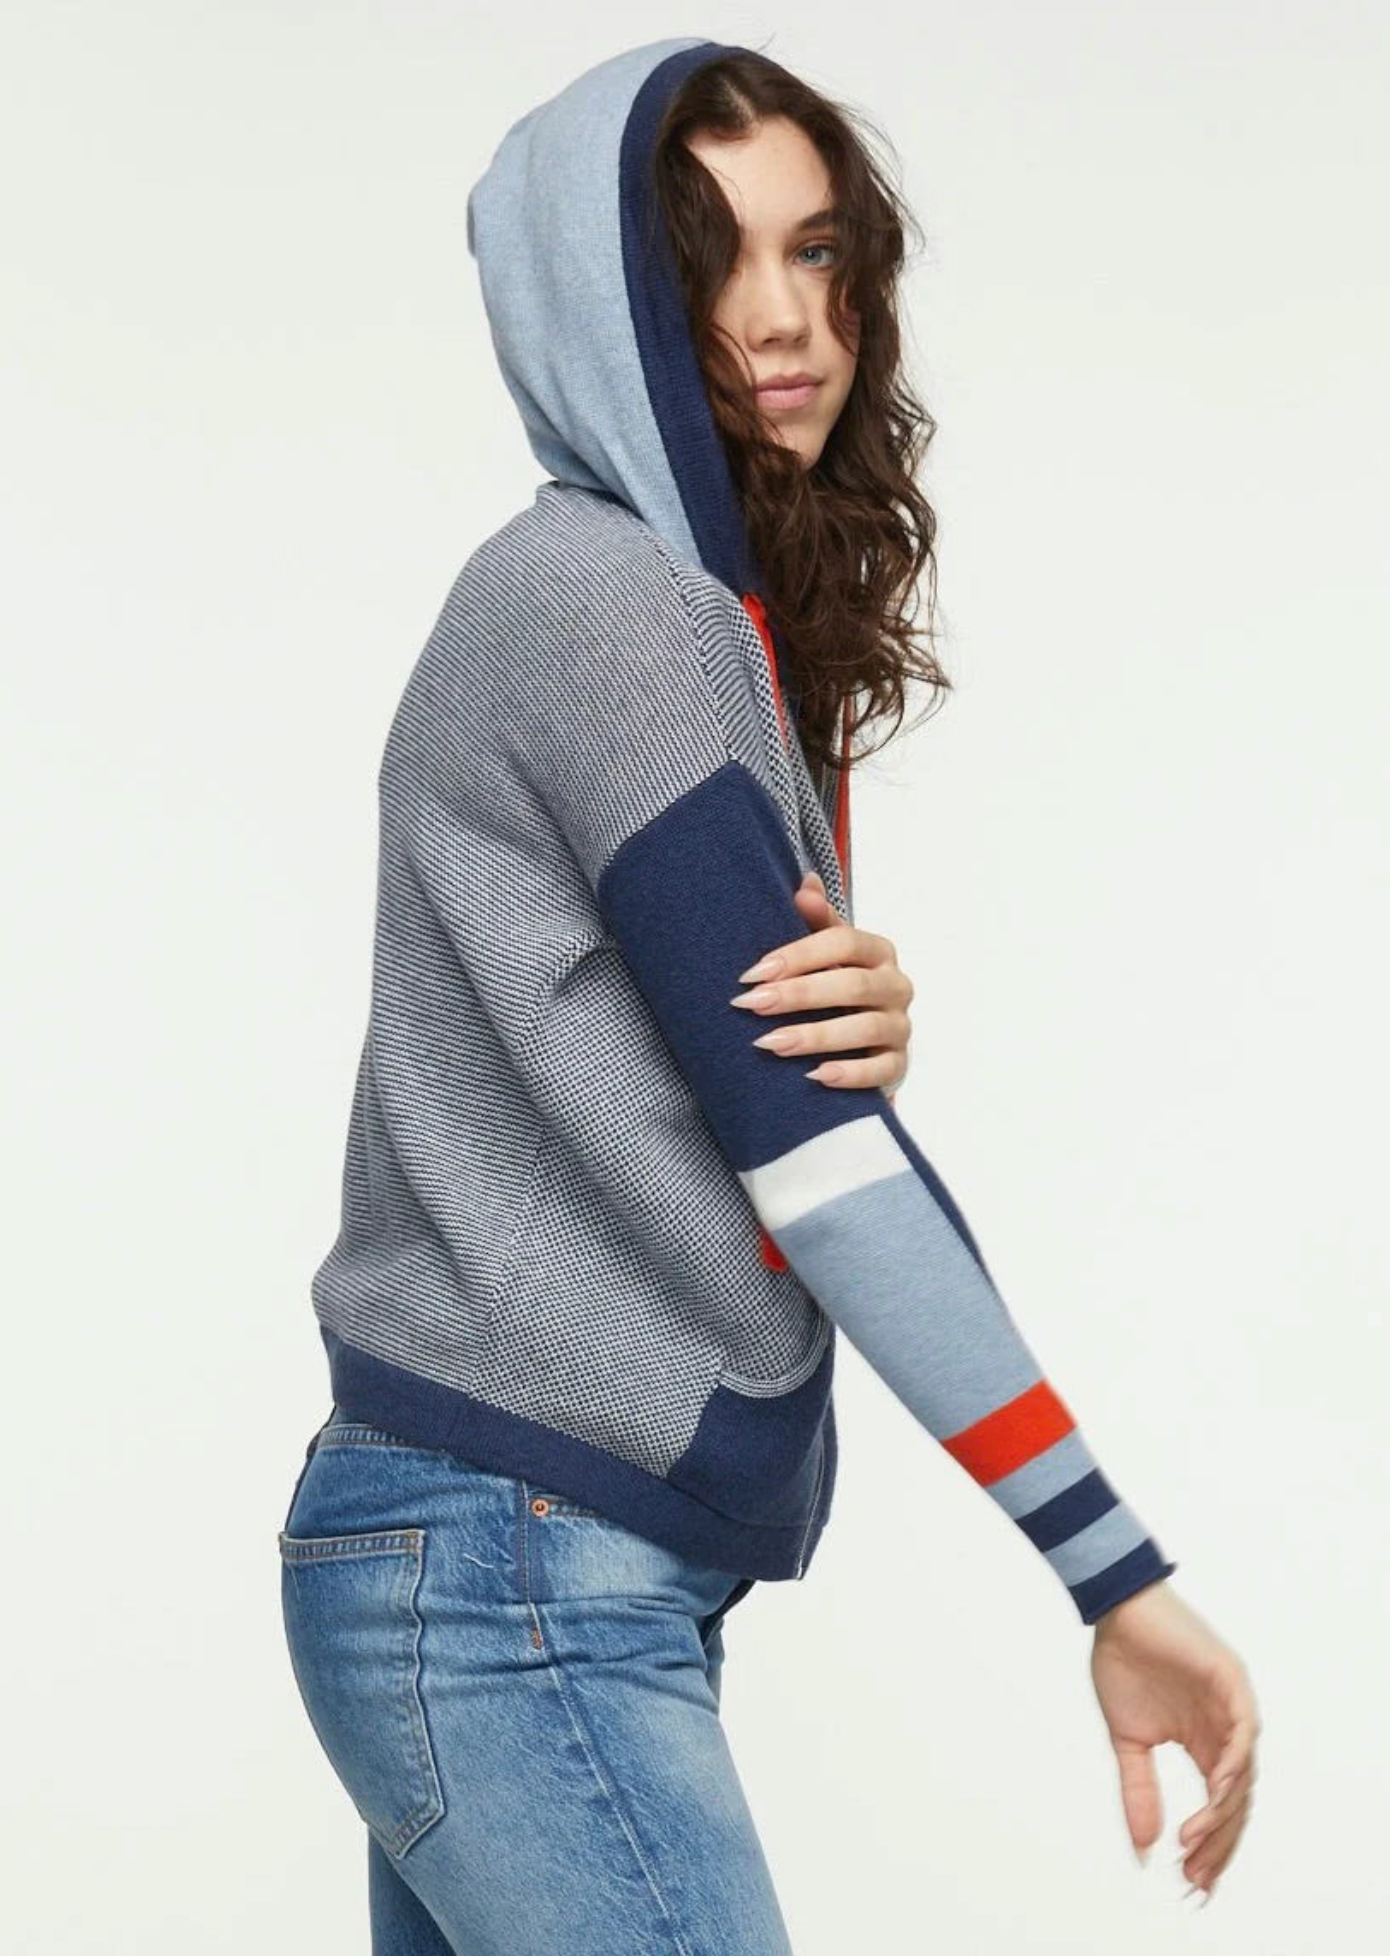 Zaket & Plover Zaket & Plover - Birdseye Hoodie - Denim Combo available at The Good Life Boutique